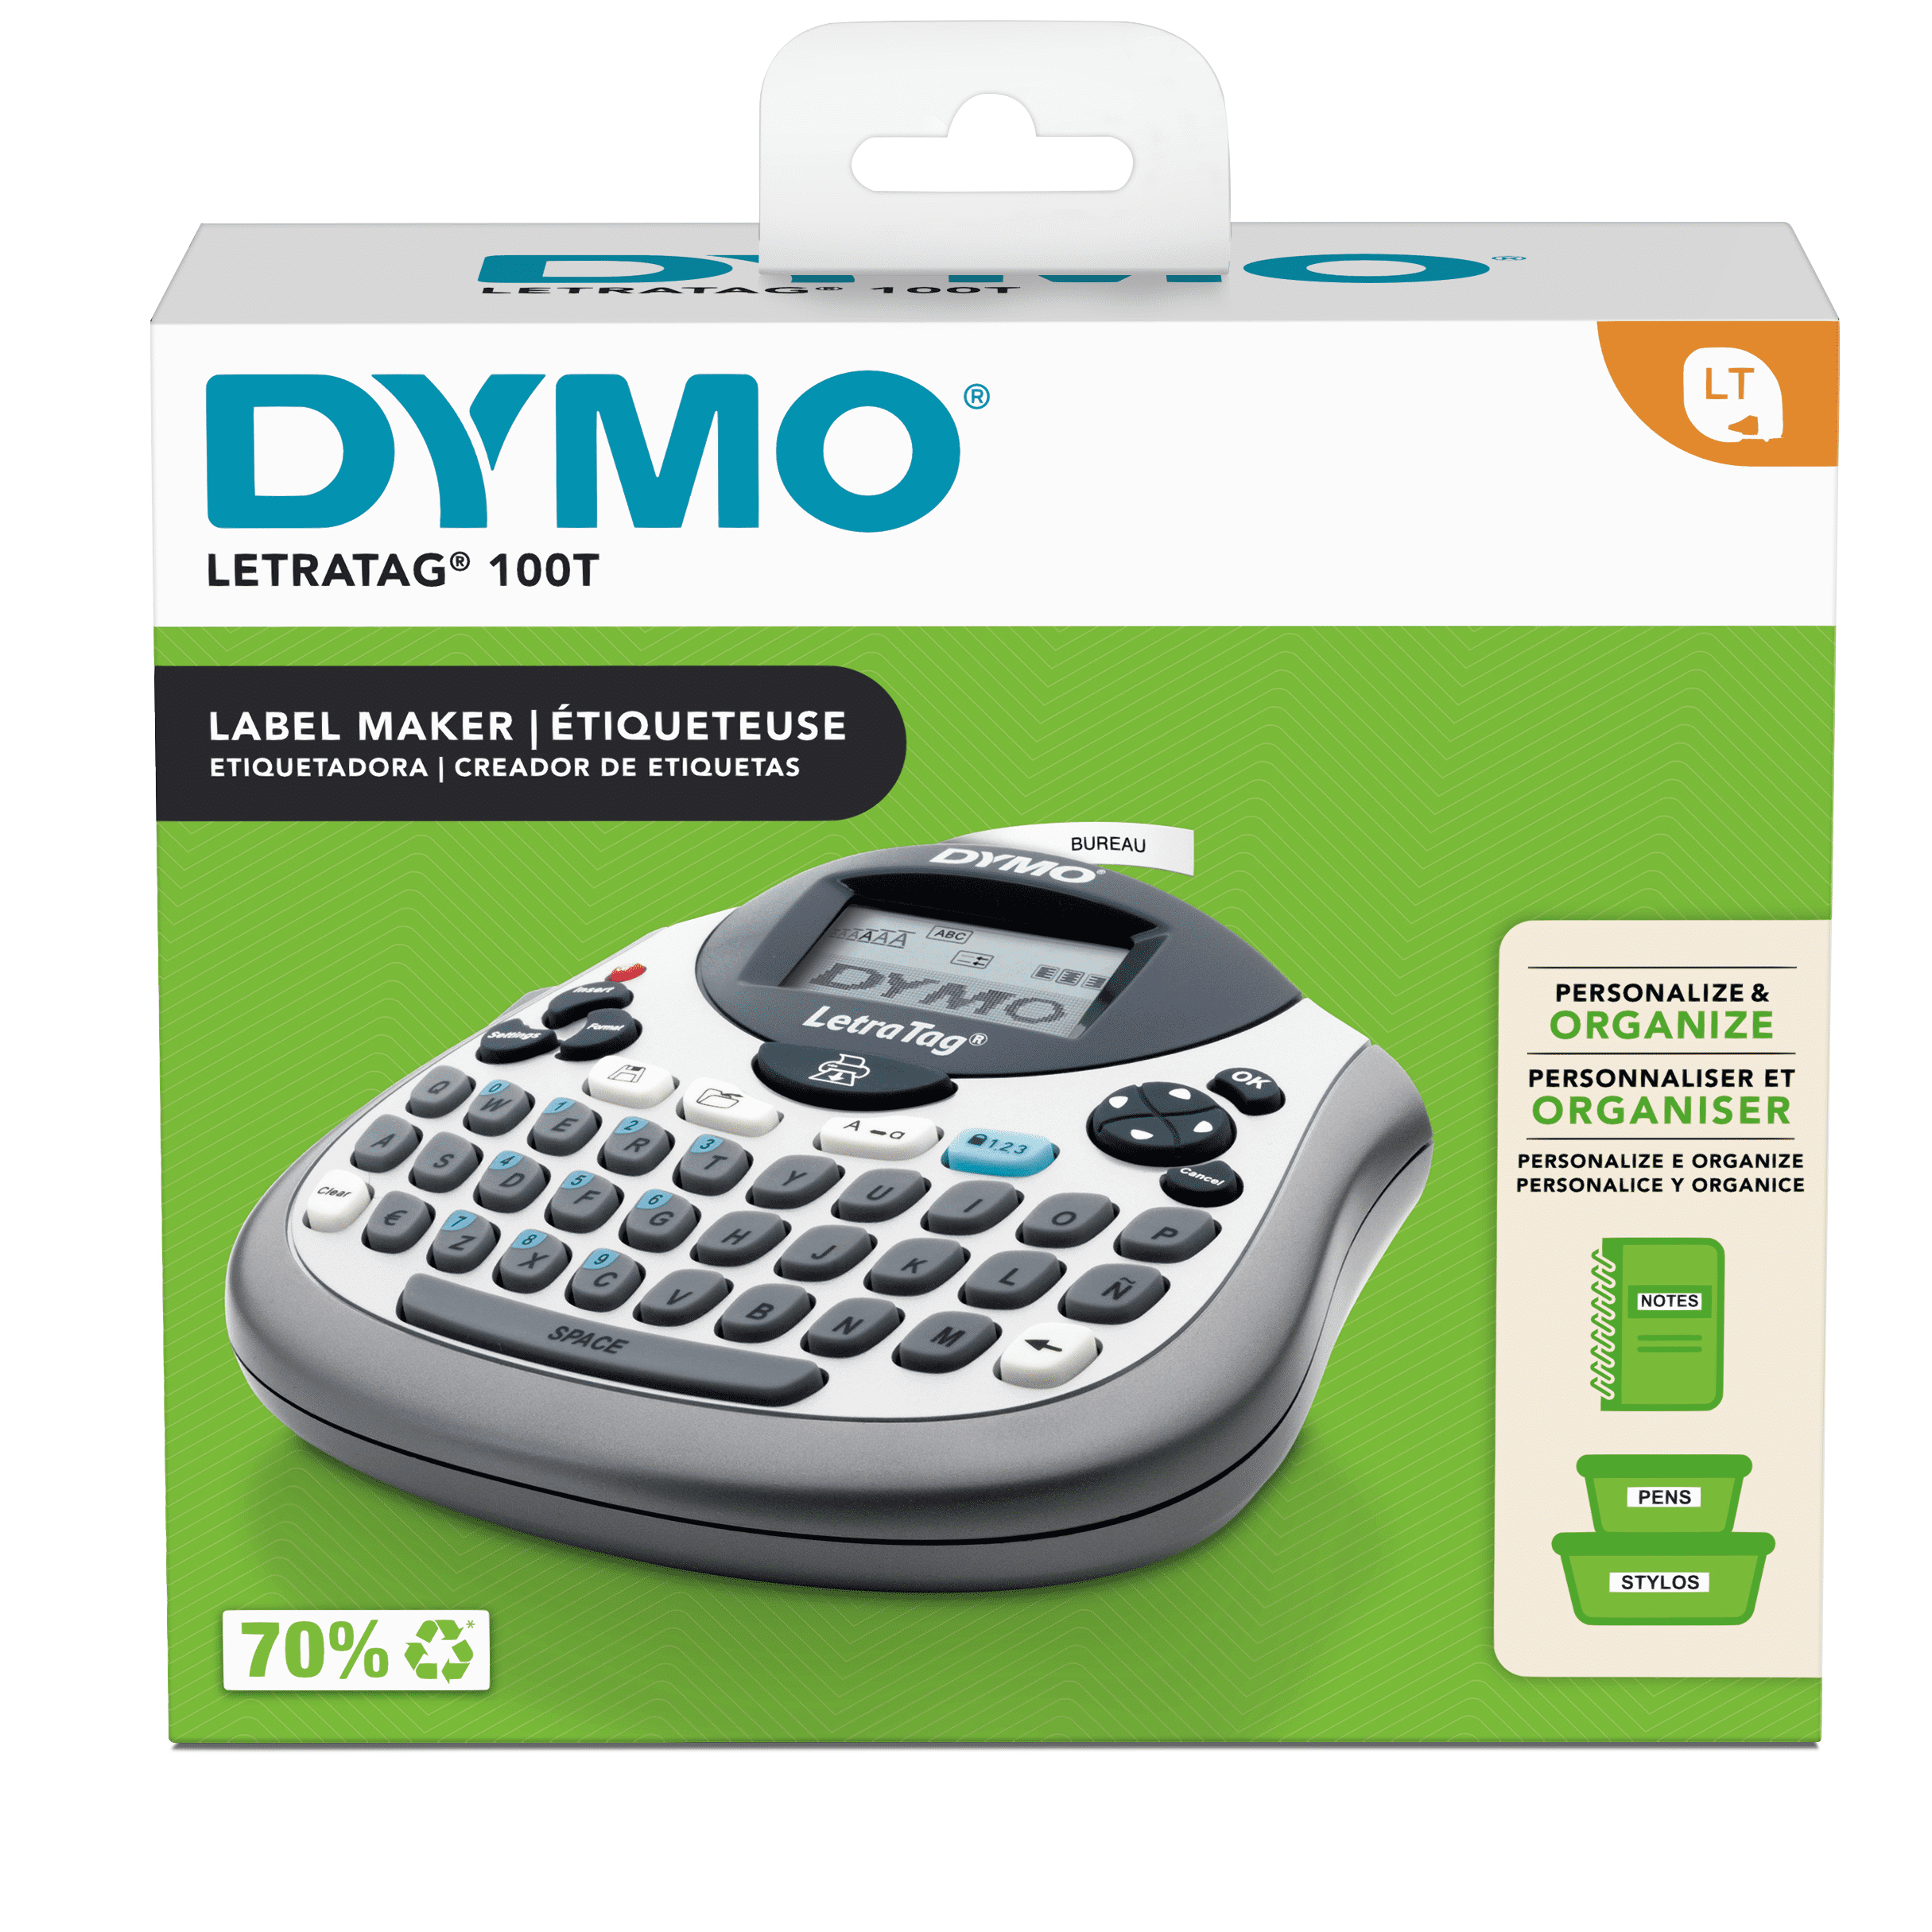 DYMO LetraTag 100T QWERTY Label Maker, Includes Black Print on White Paper  Label